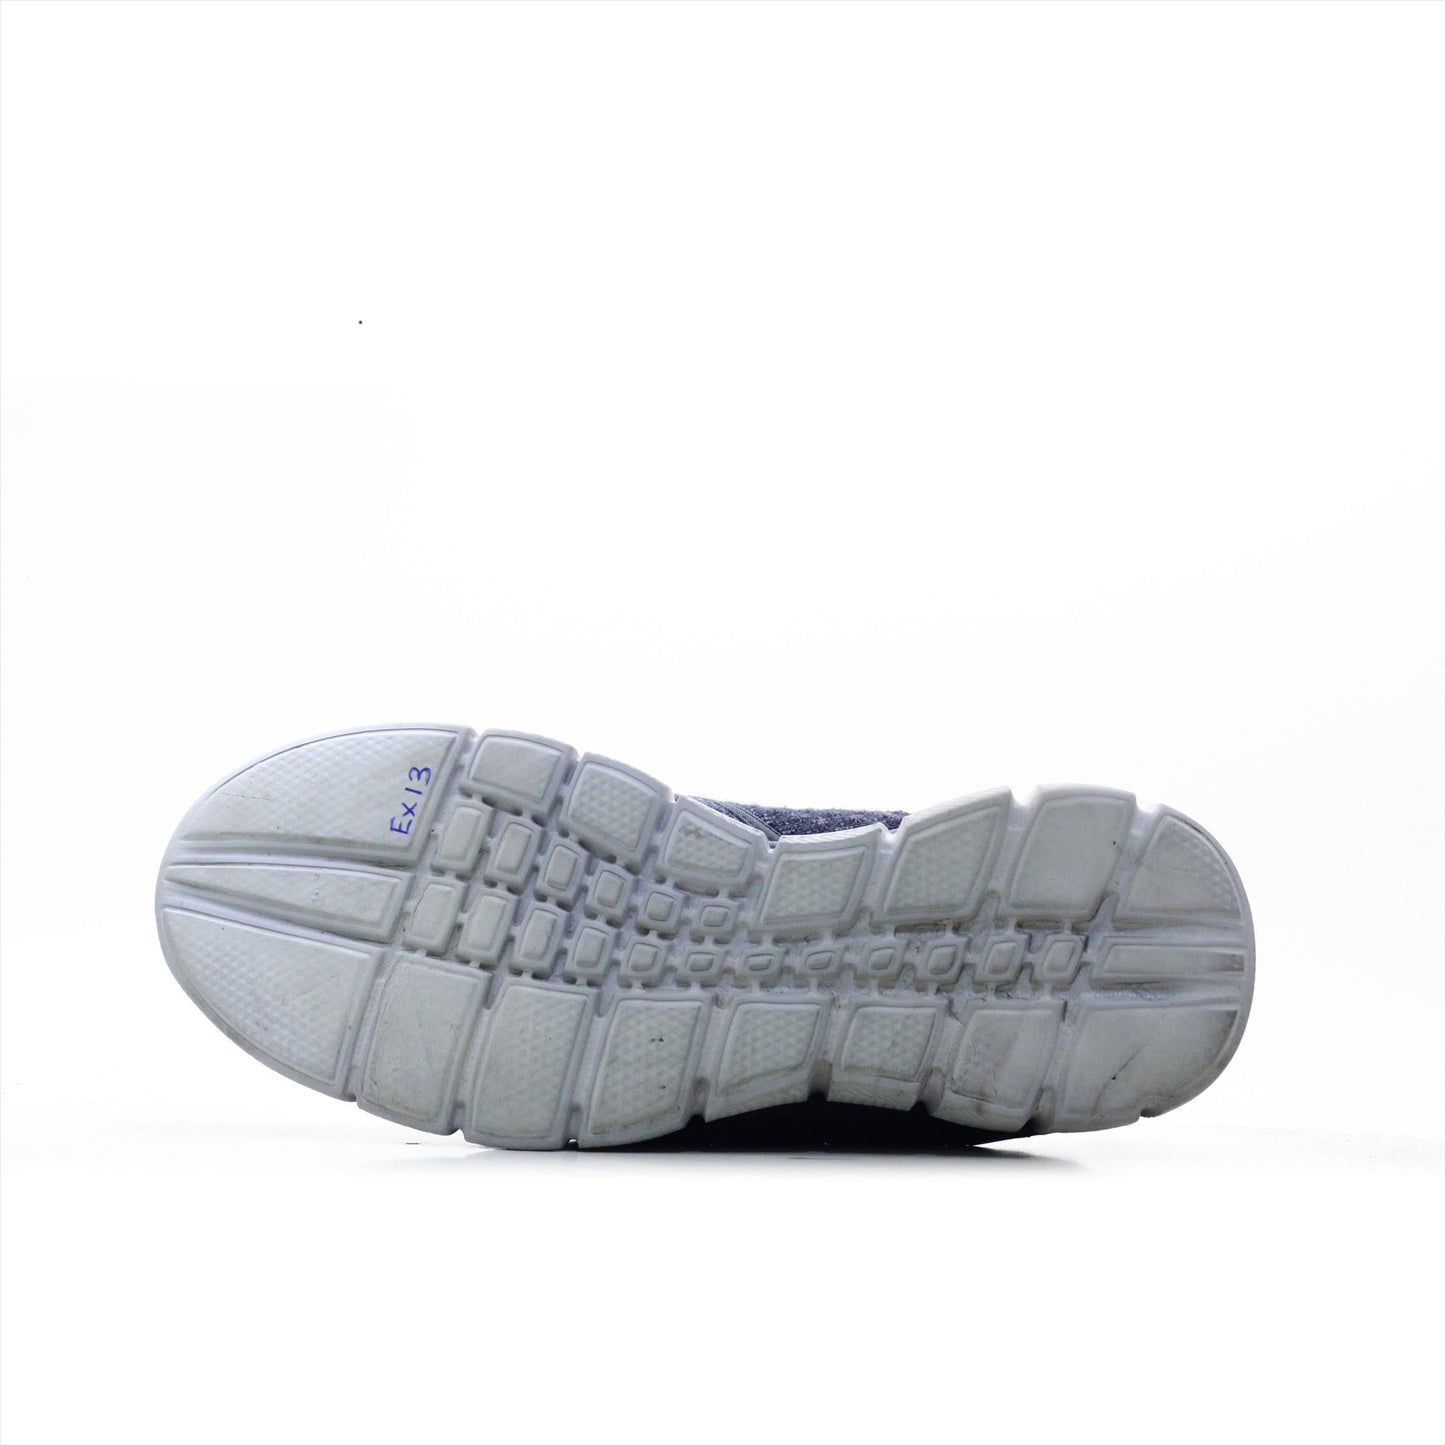 SKECHERS RELAXED FIT AIR COOLED MEMORY FOAM (Original USA Imported)